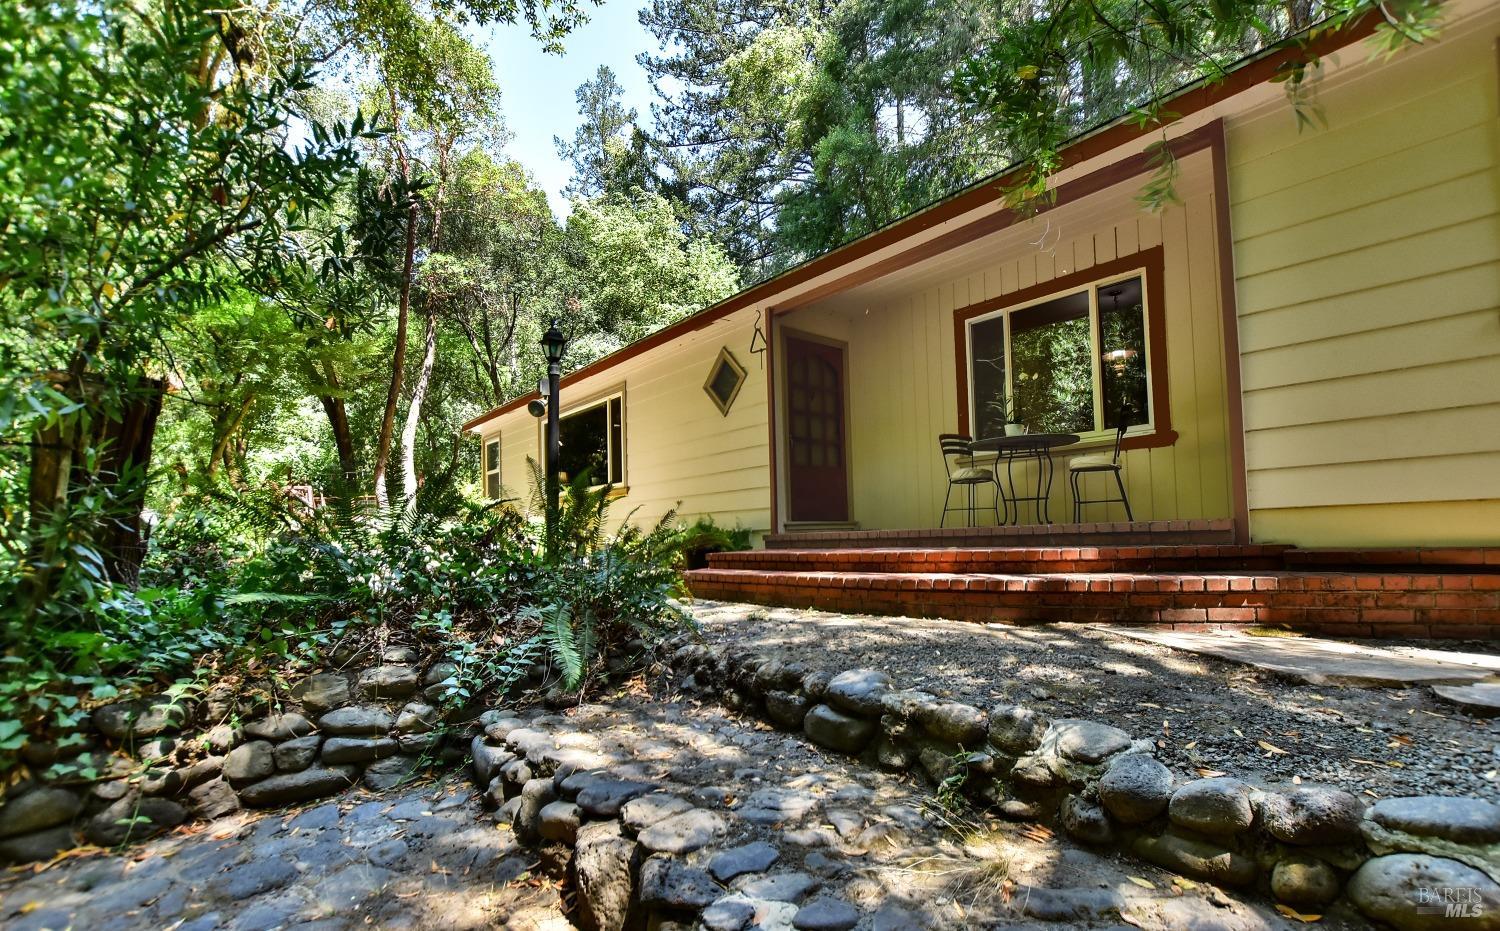 Lovely mid-century home with front patio facing the year round creek.